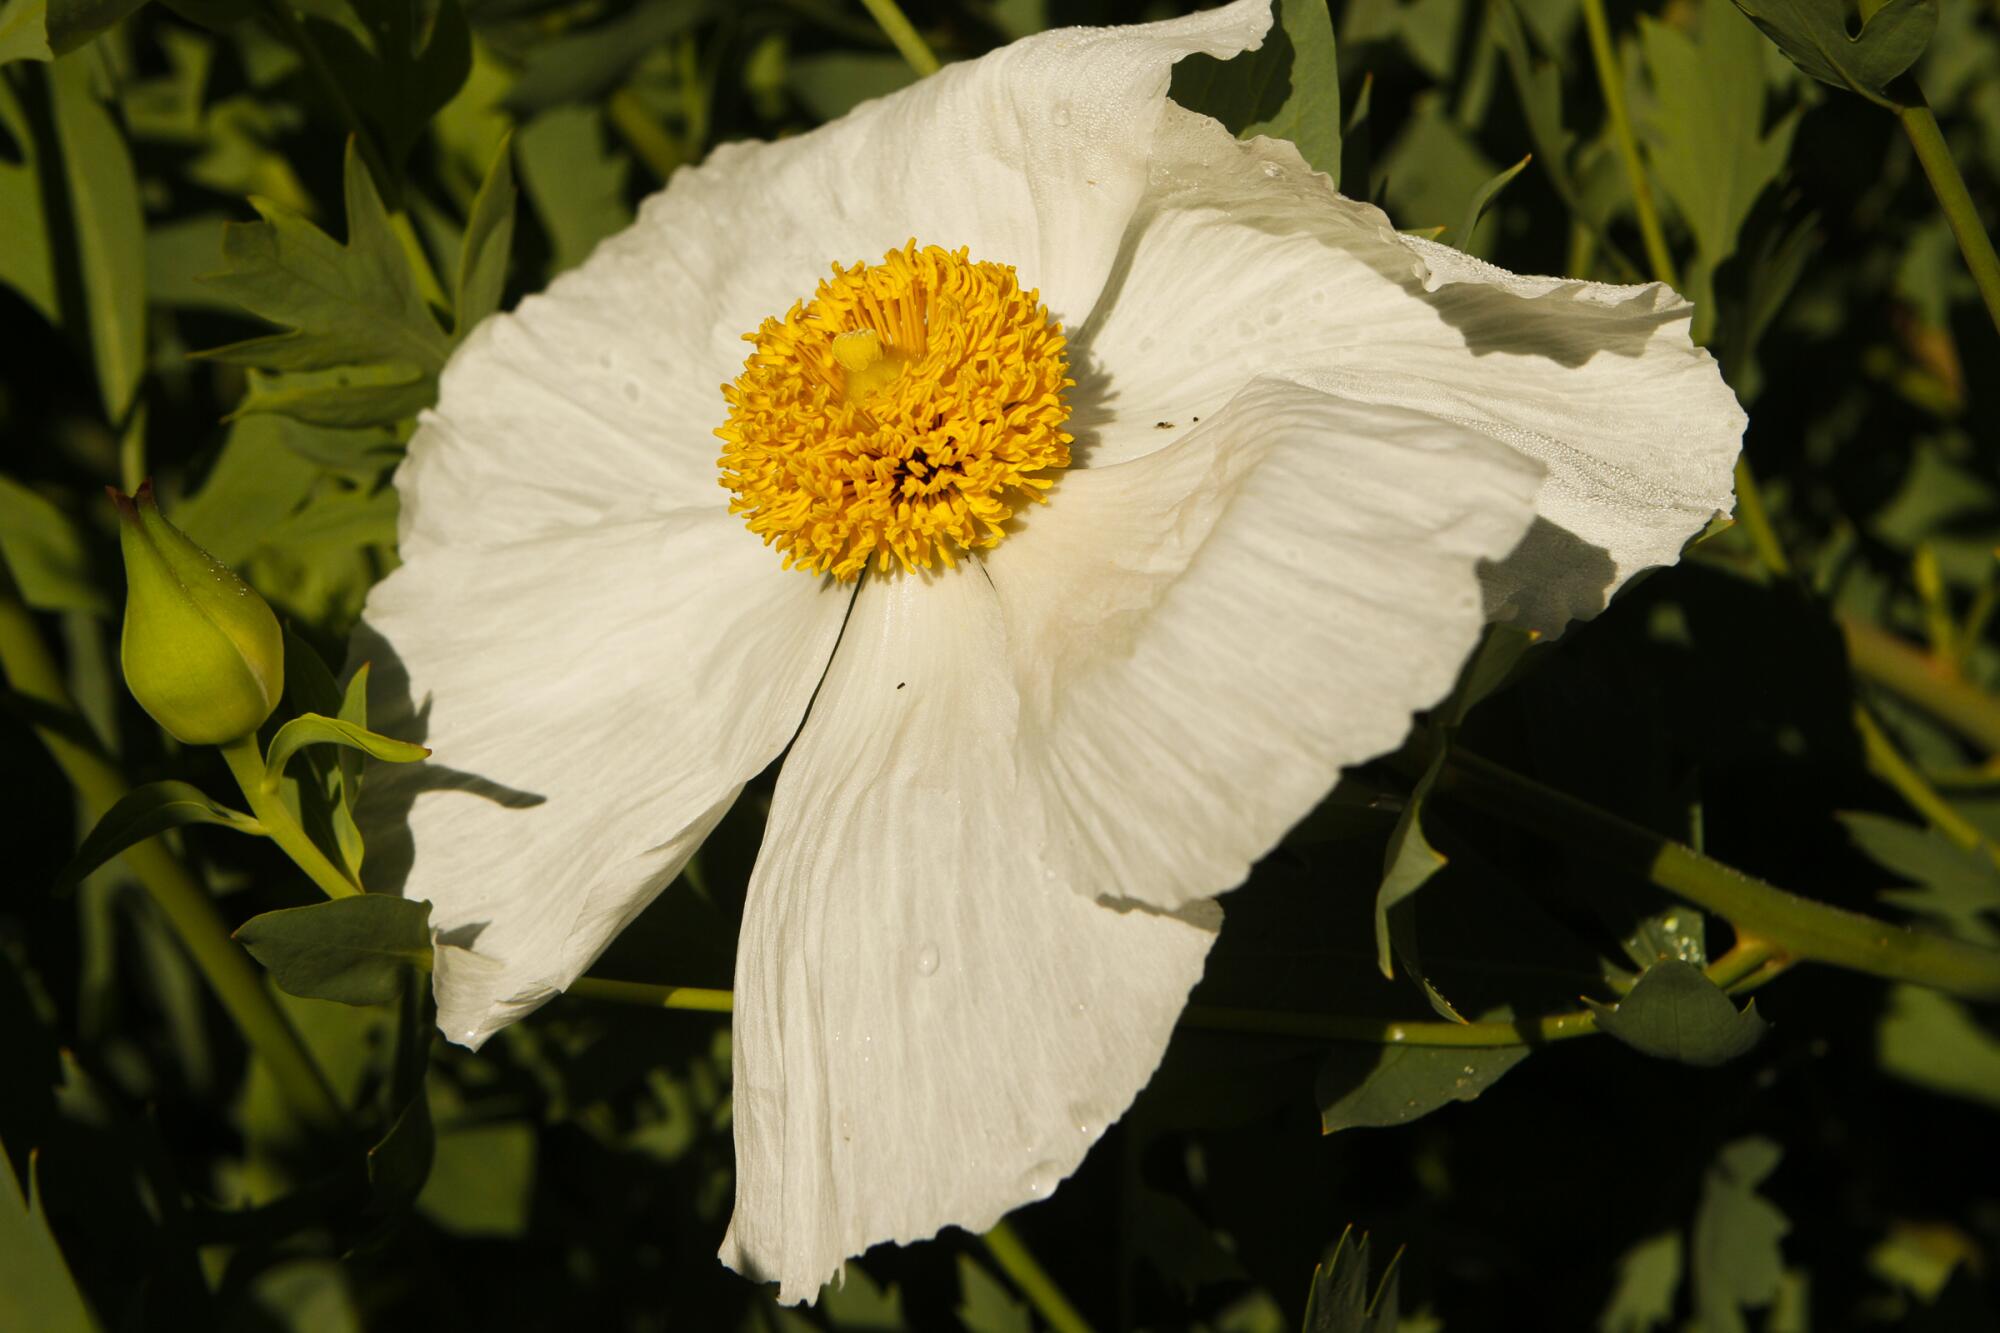 Matilija poppy with huge white crepe-papery petals around a yolk-colored center